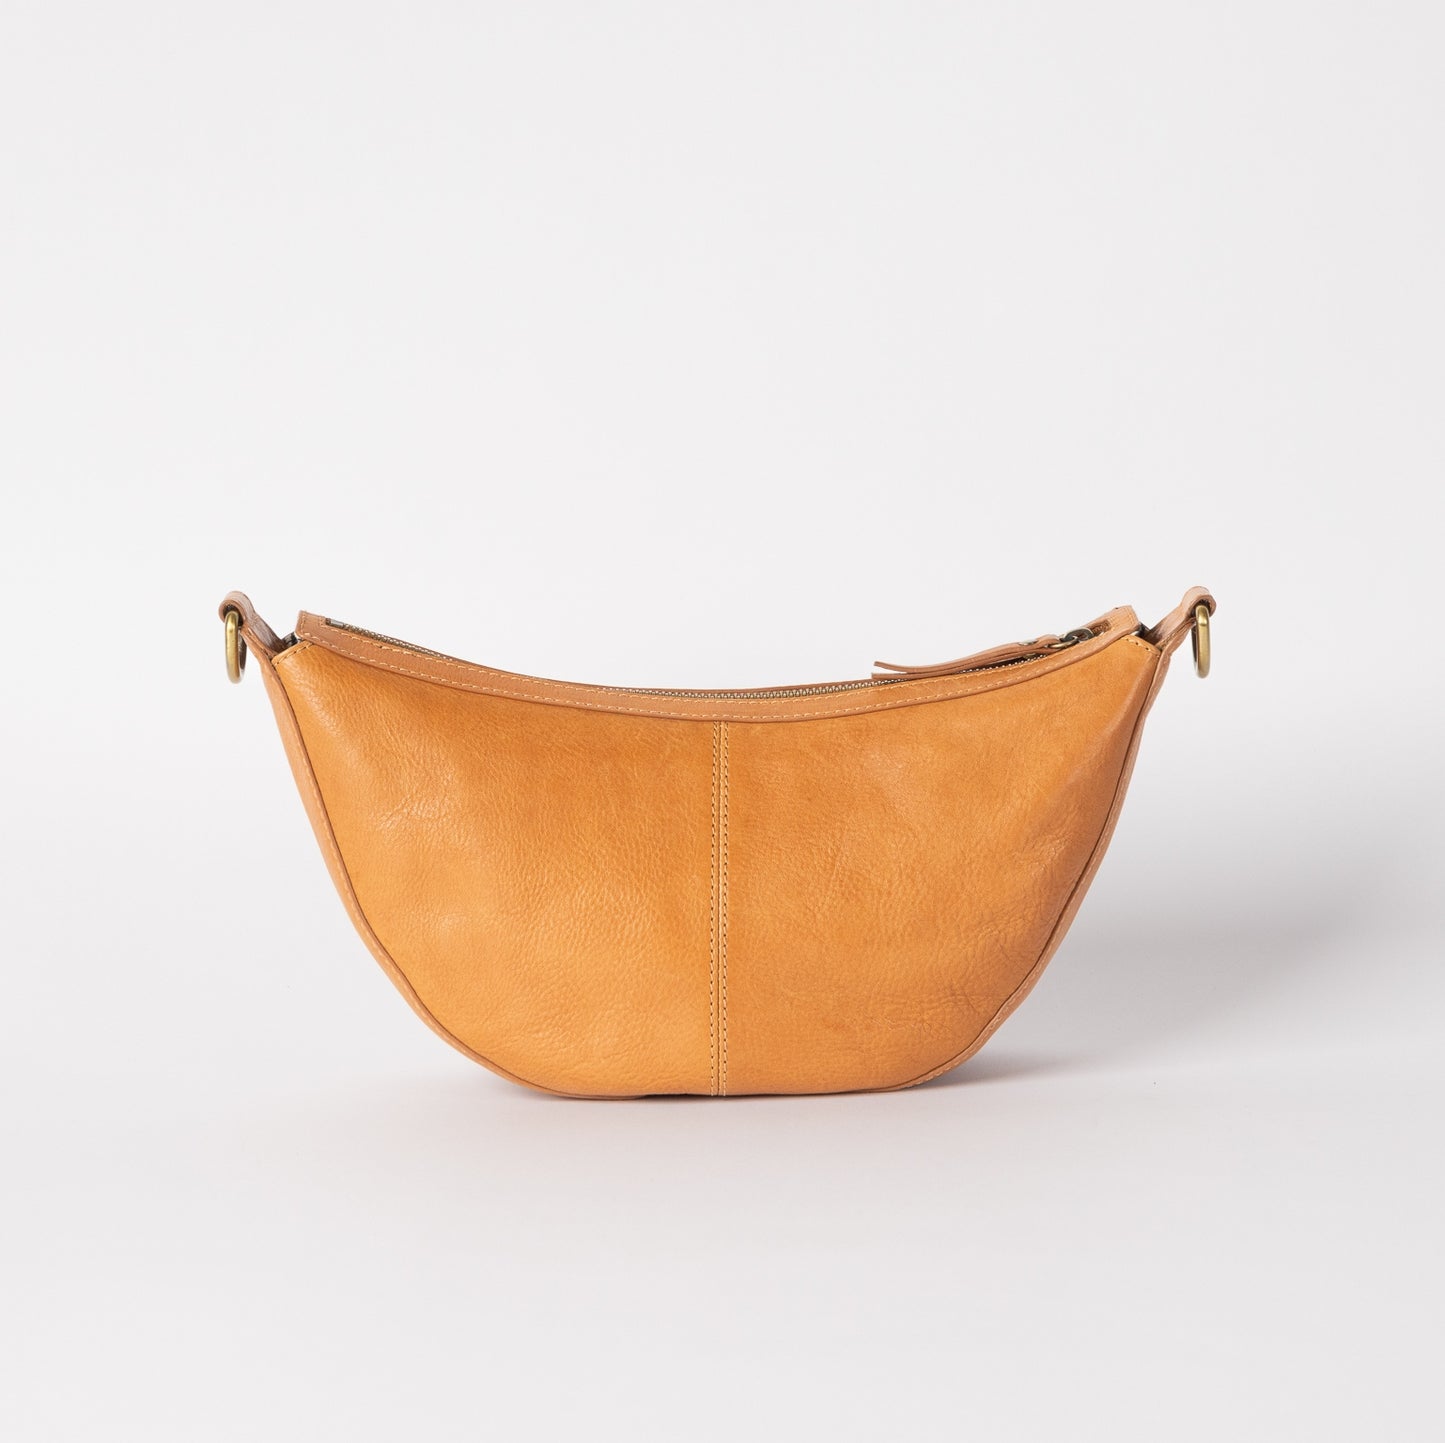 The Leo cross body bum bag can be worn across the body as a bum bag, or on the shoulder as chic arm candy. Leo is unisex, catering to everyone who embraces that bumbag style. Made in India.